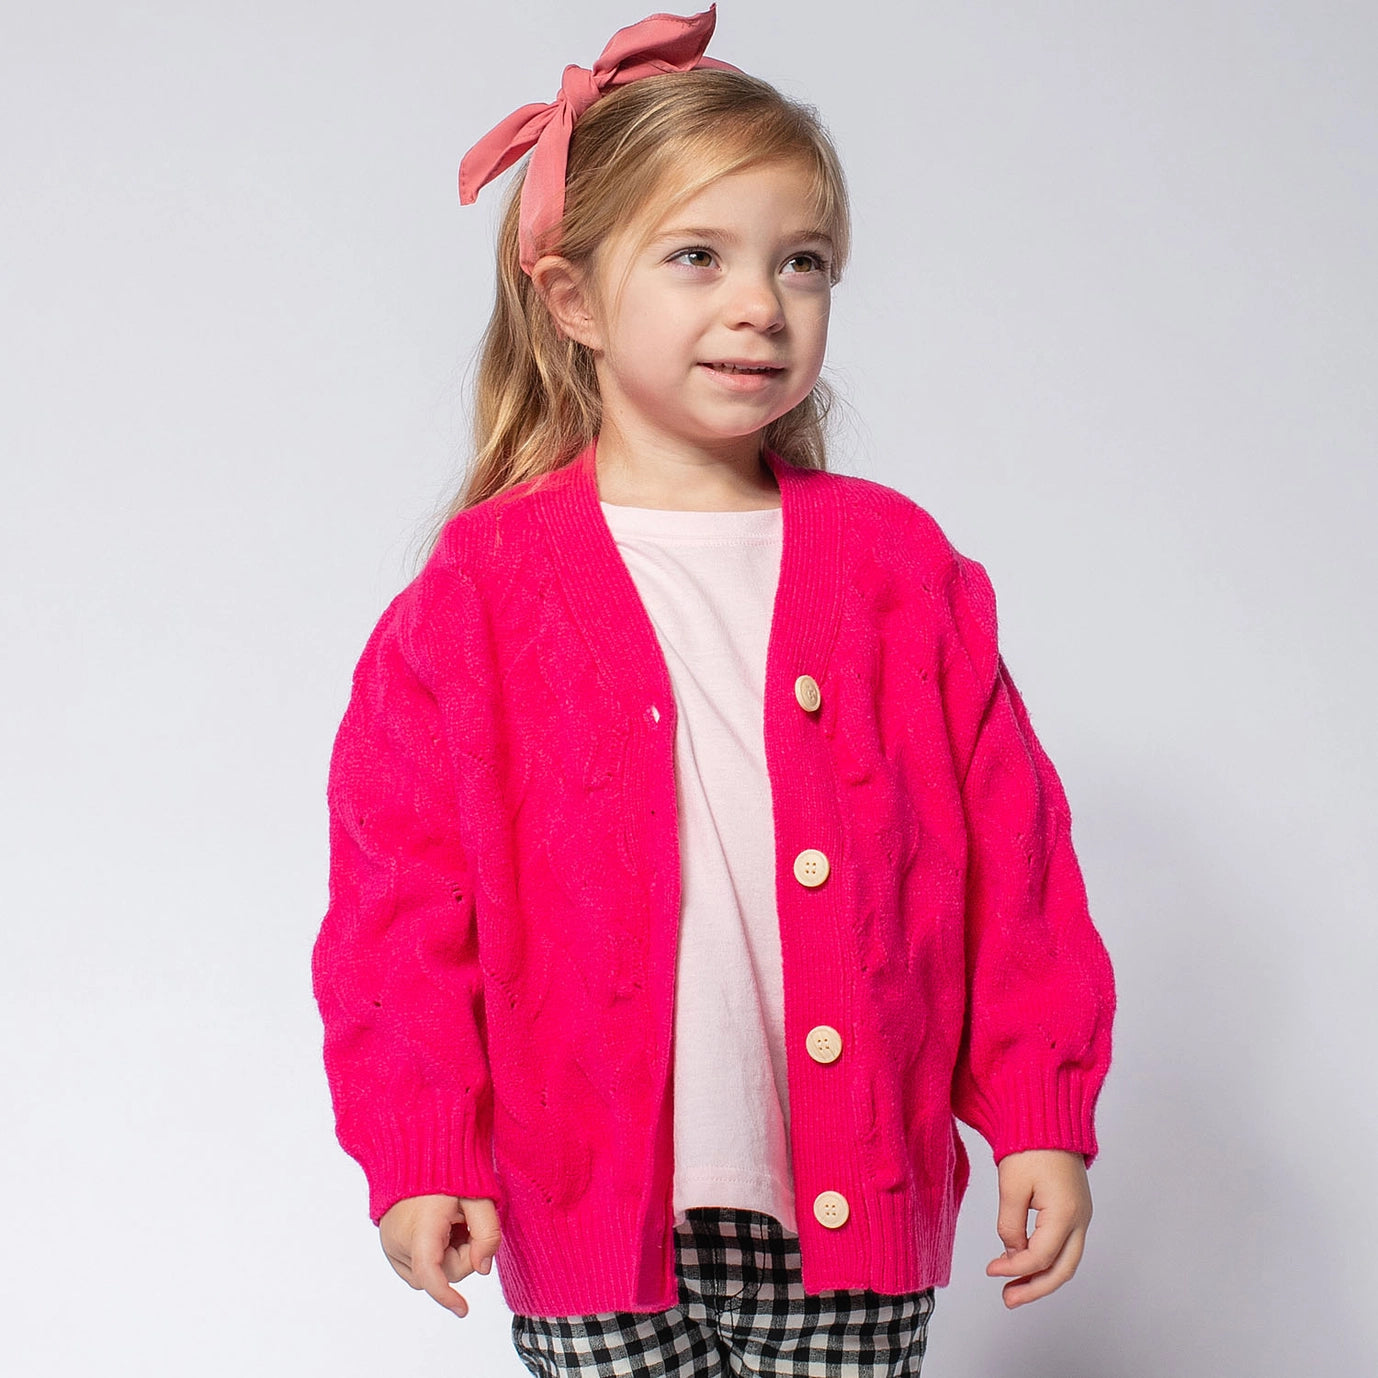 Hot Pink Twisted Knit Cardigan